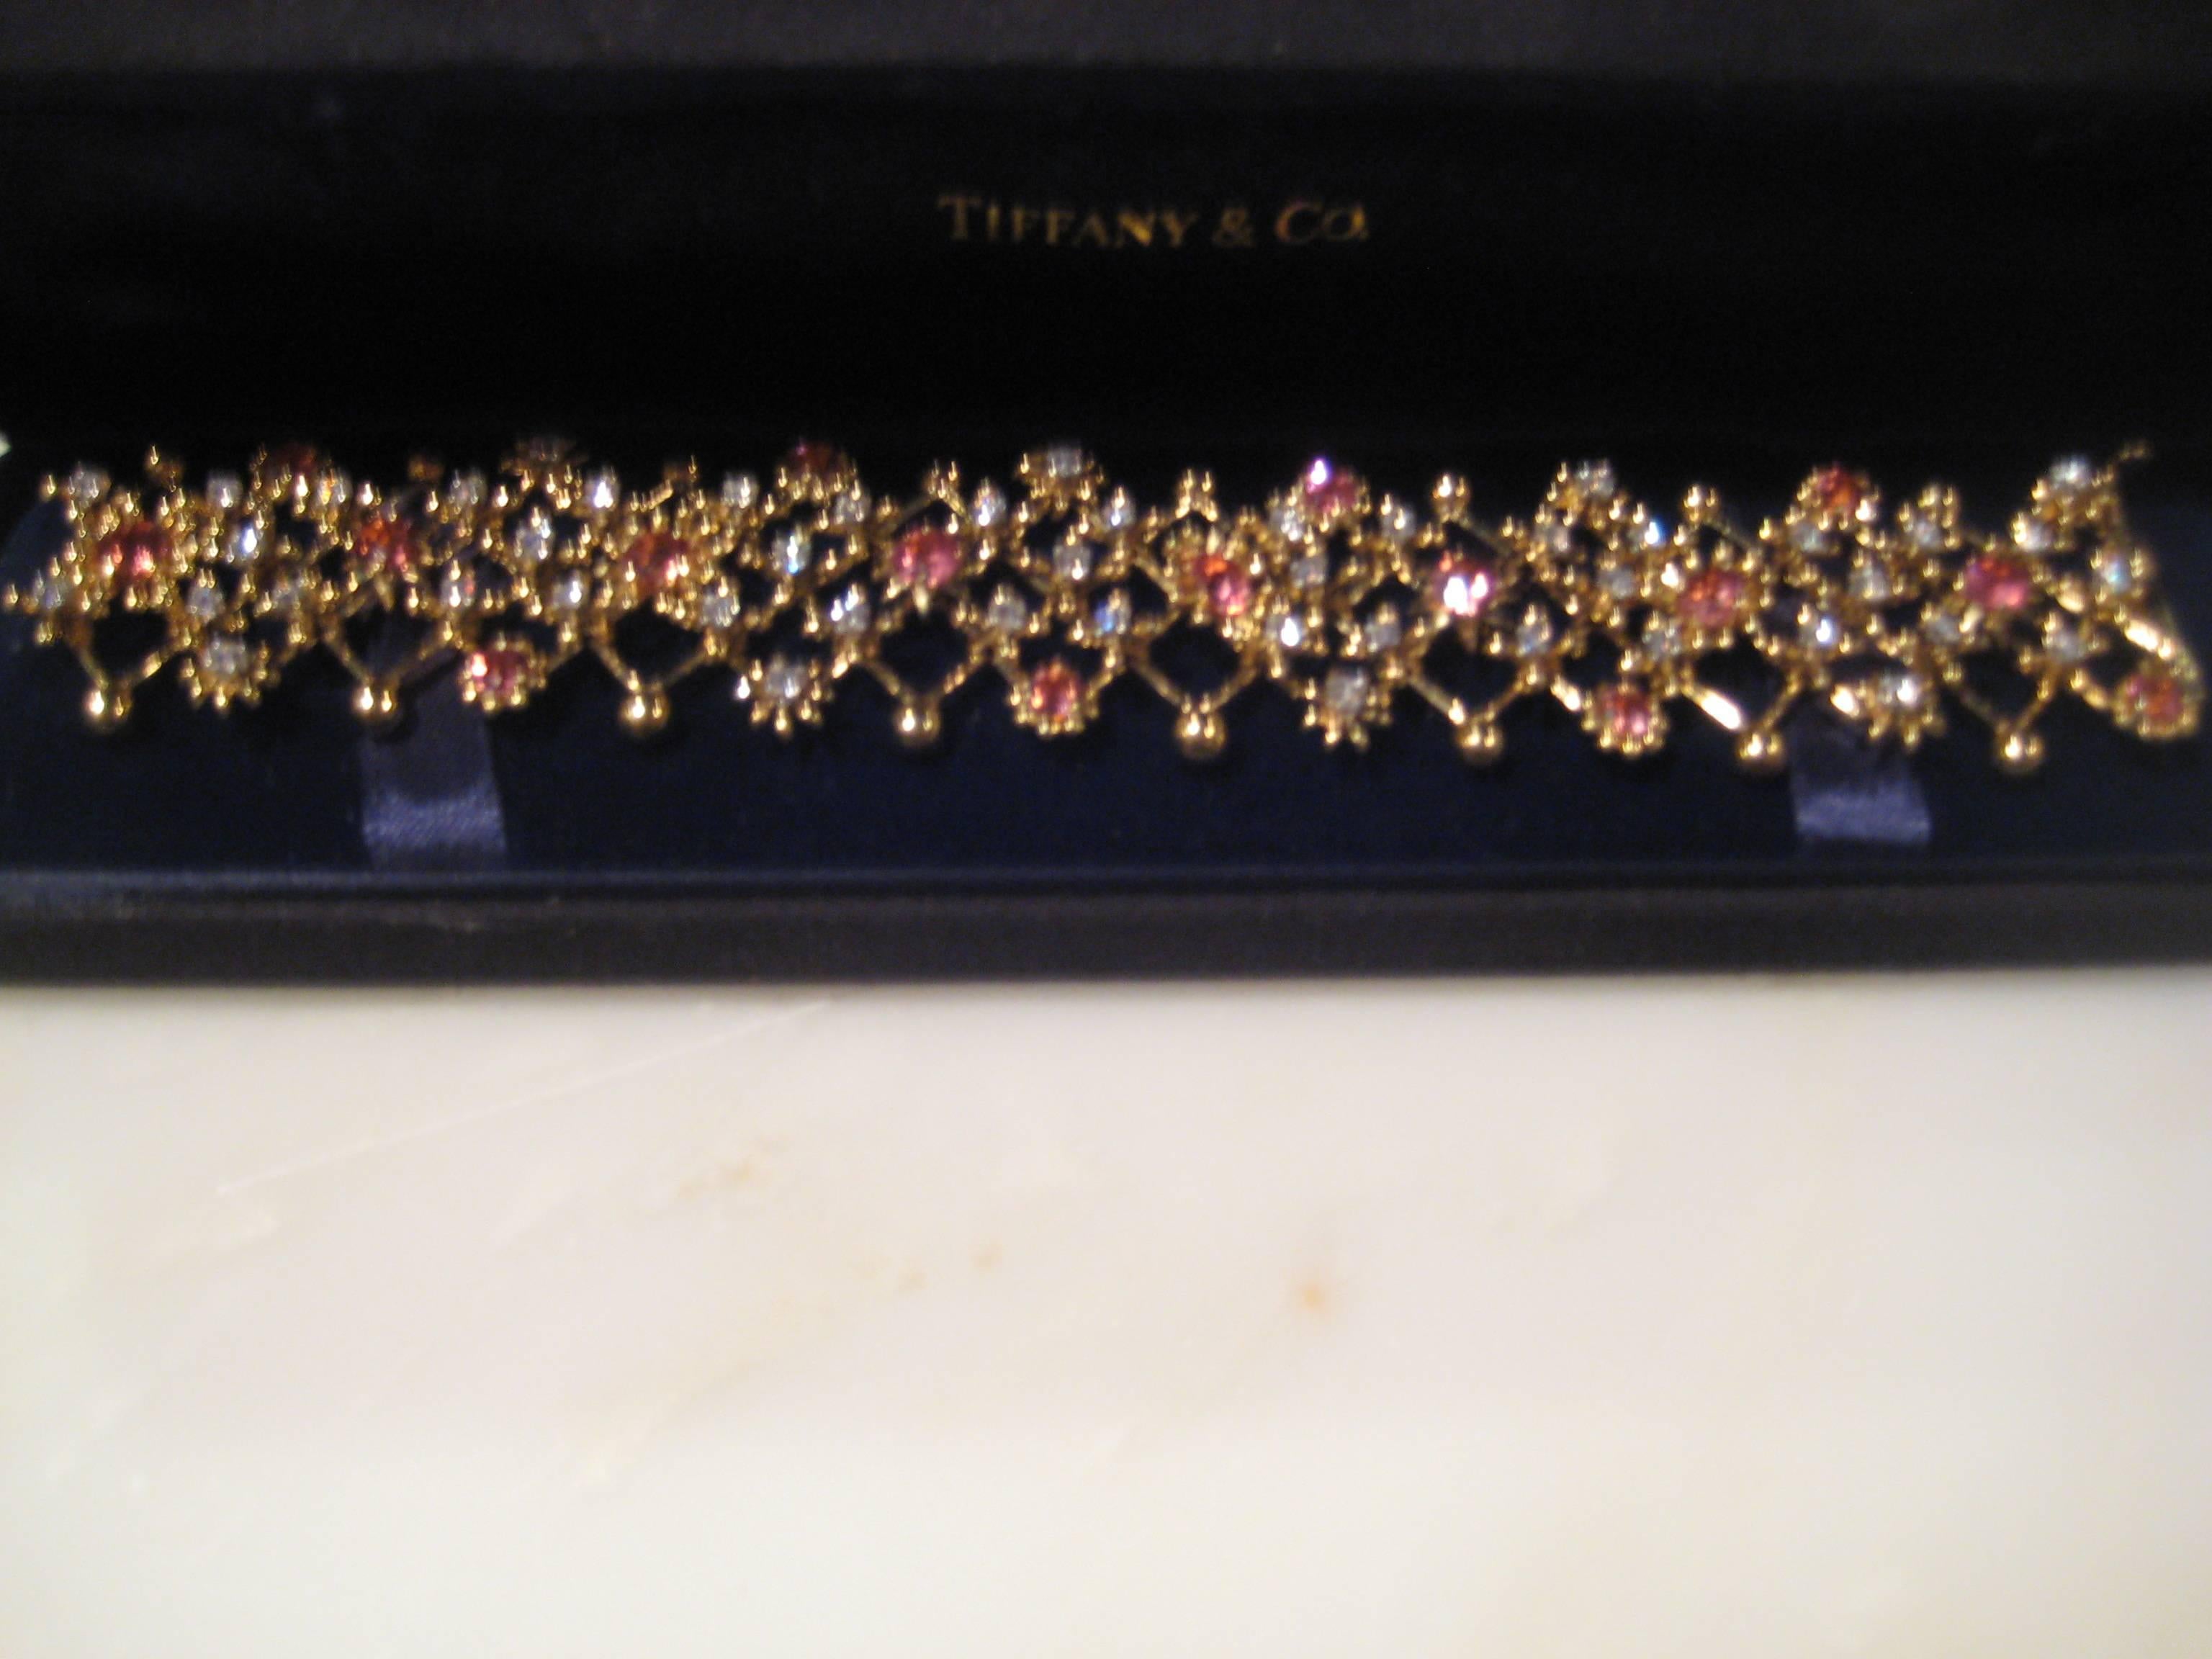 Vintage Tiffany & Co. 18KT Yellow gold diamond and pink sapphire bracelet. Bracelet contains approximately 4.00cts. in diamonds and approximately and approximately 16.00cts. in pink sapphires . Diamonds are F - G in color and VVS - VS in clarity.